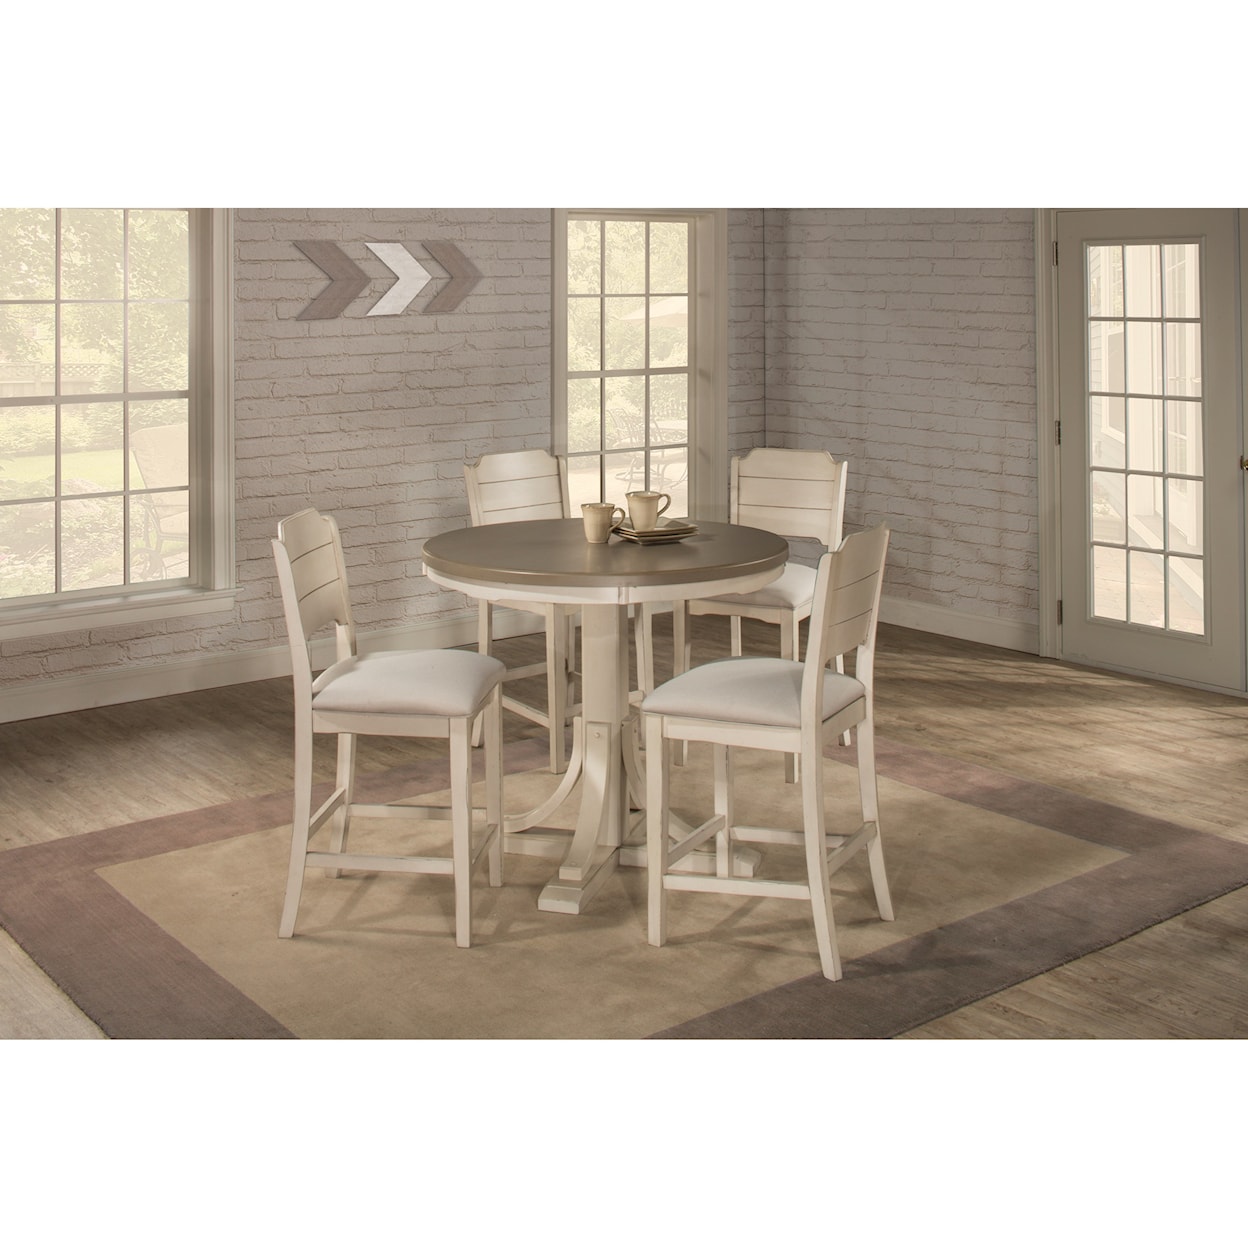 Hillsdale Clarion 5-Piece Counter Height Dining Set